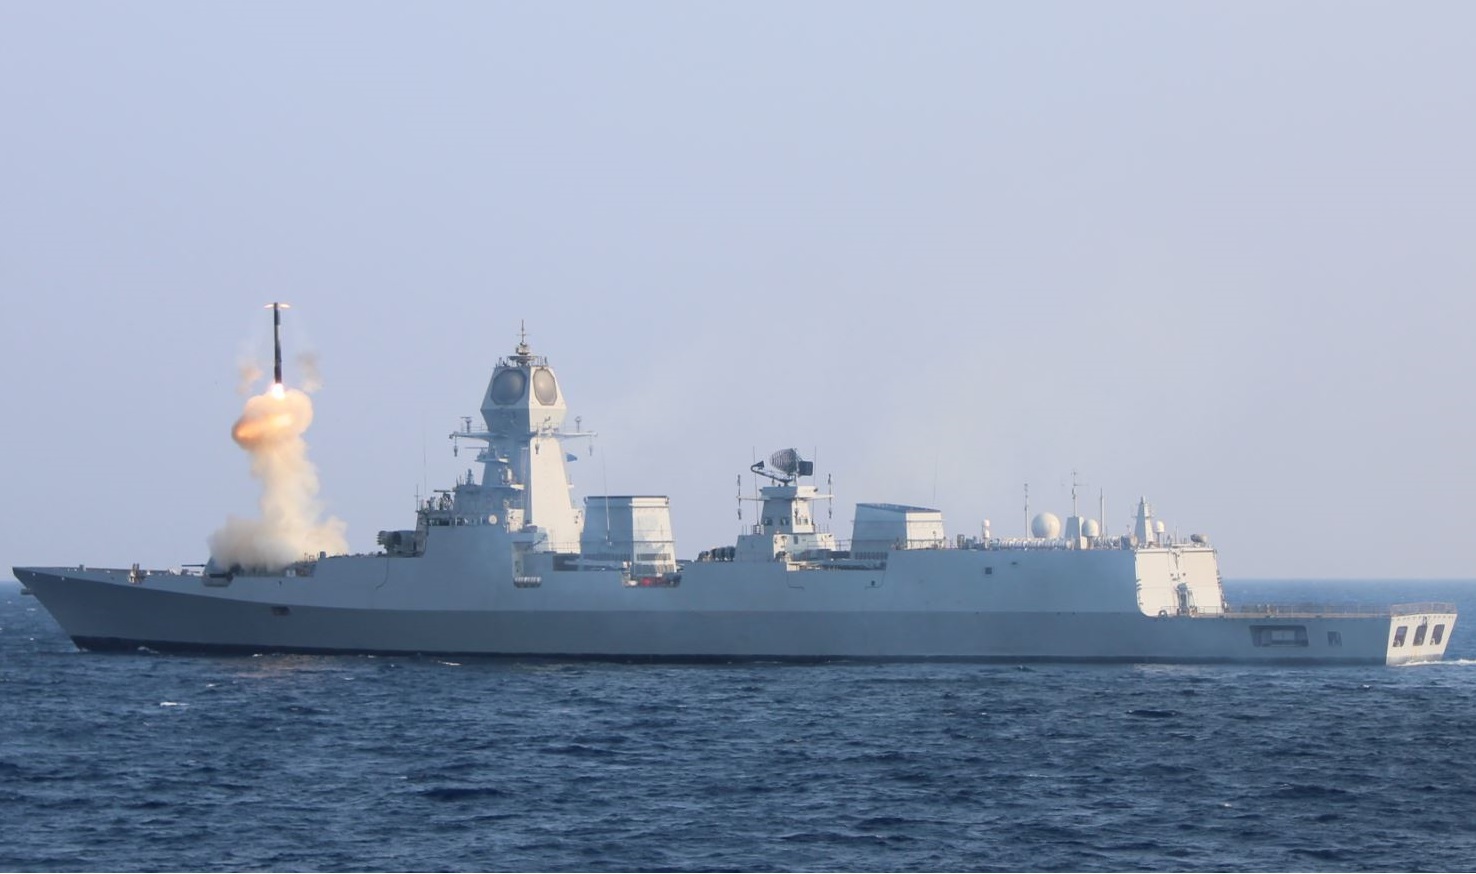 Indian Navy Destroyer INS Imphal (D68) Fires BrahMos Missile In Its Maiden Sea Trials